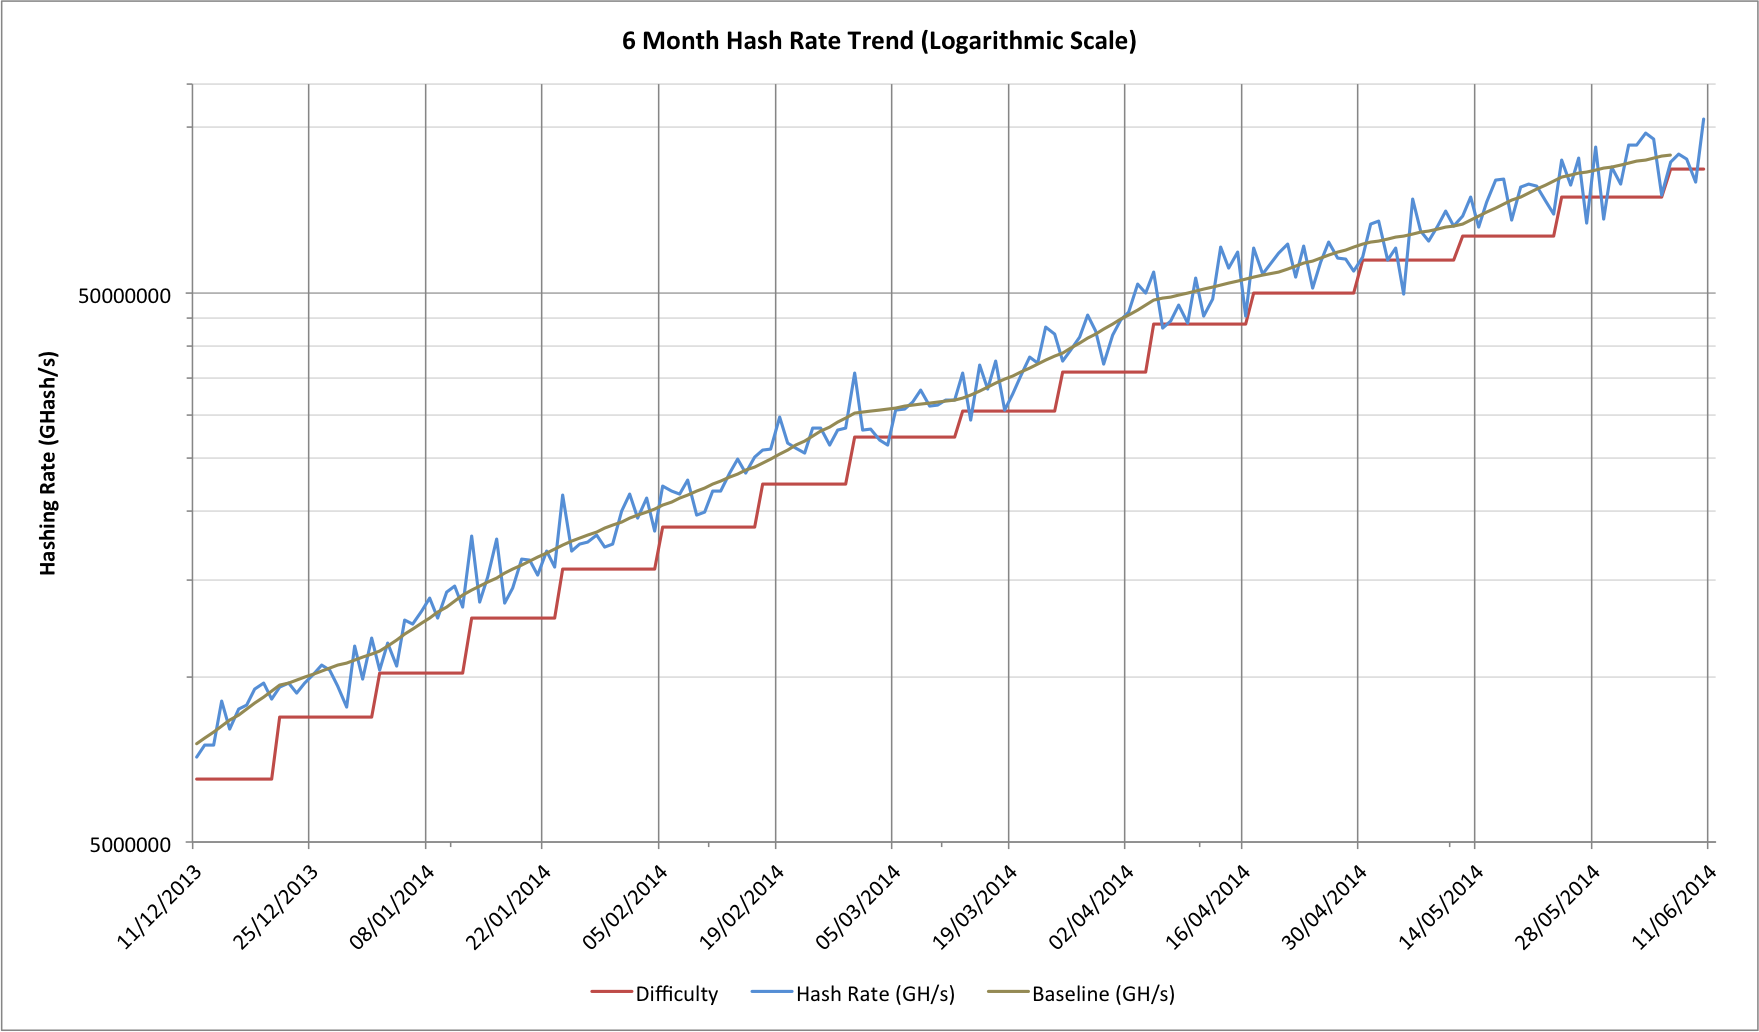 Bitcoin hash rate for the last 6 months (June 2014) on a logarithmic scale